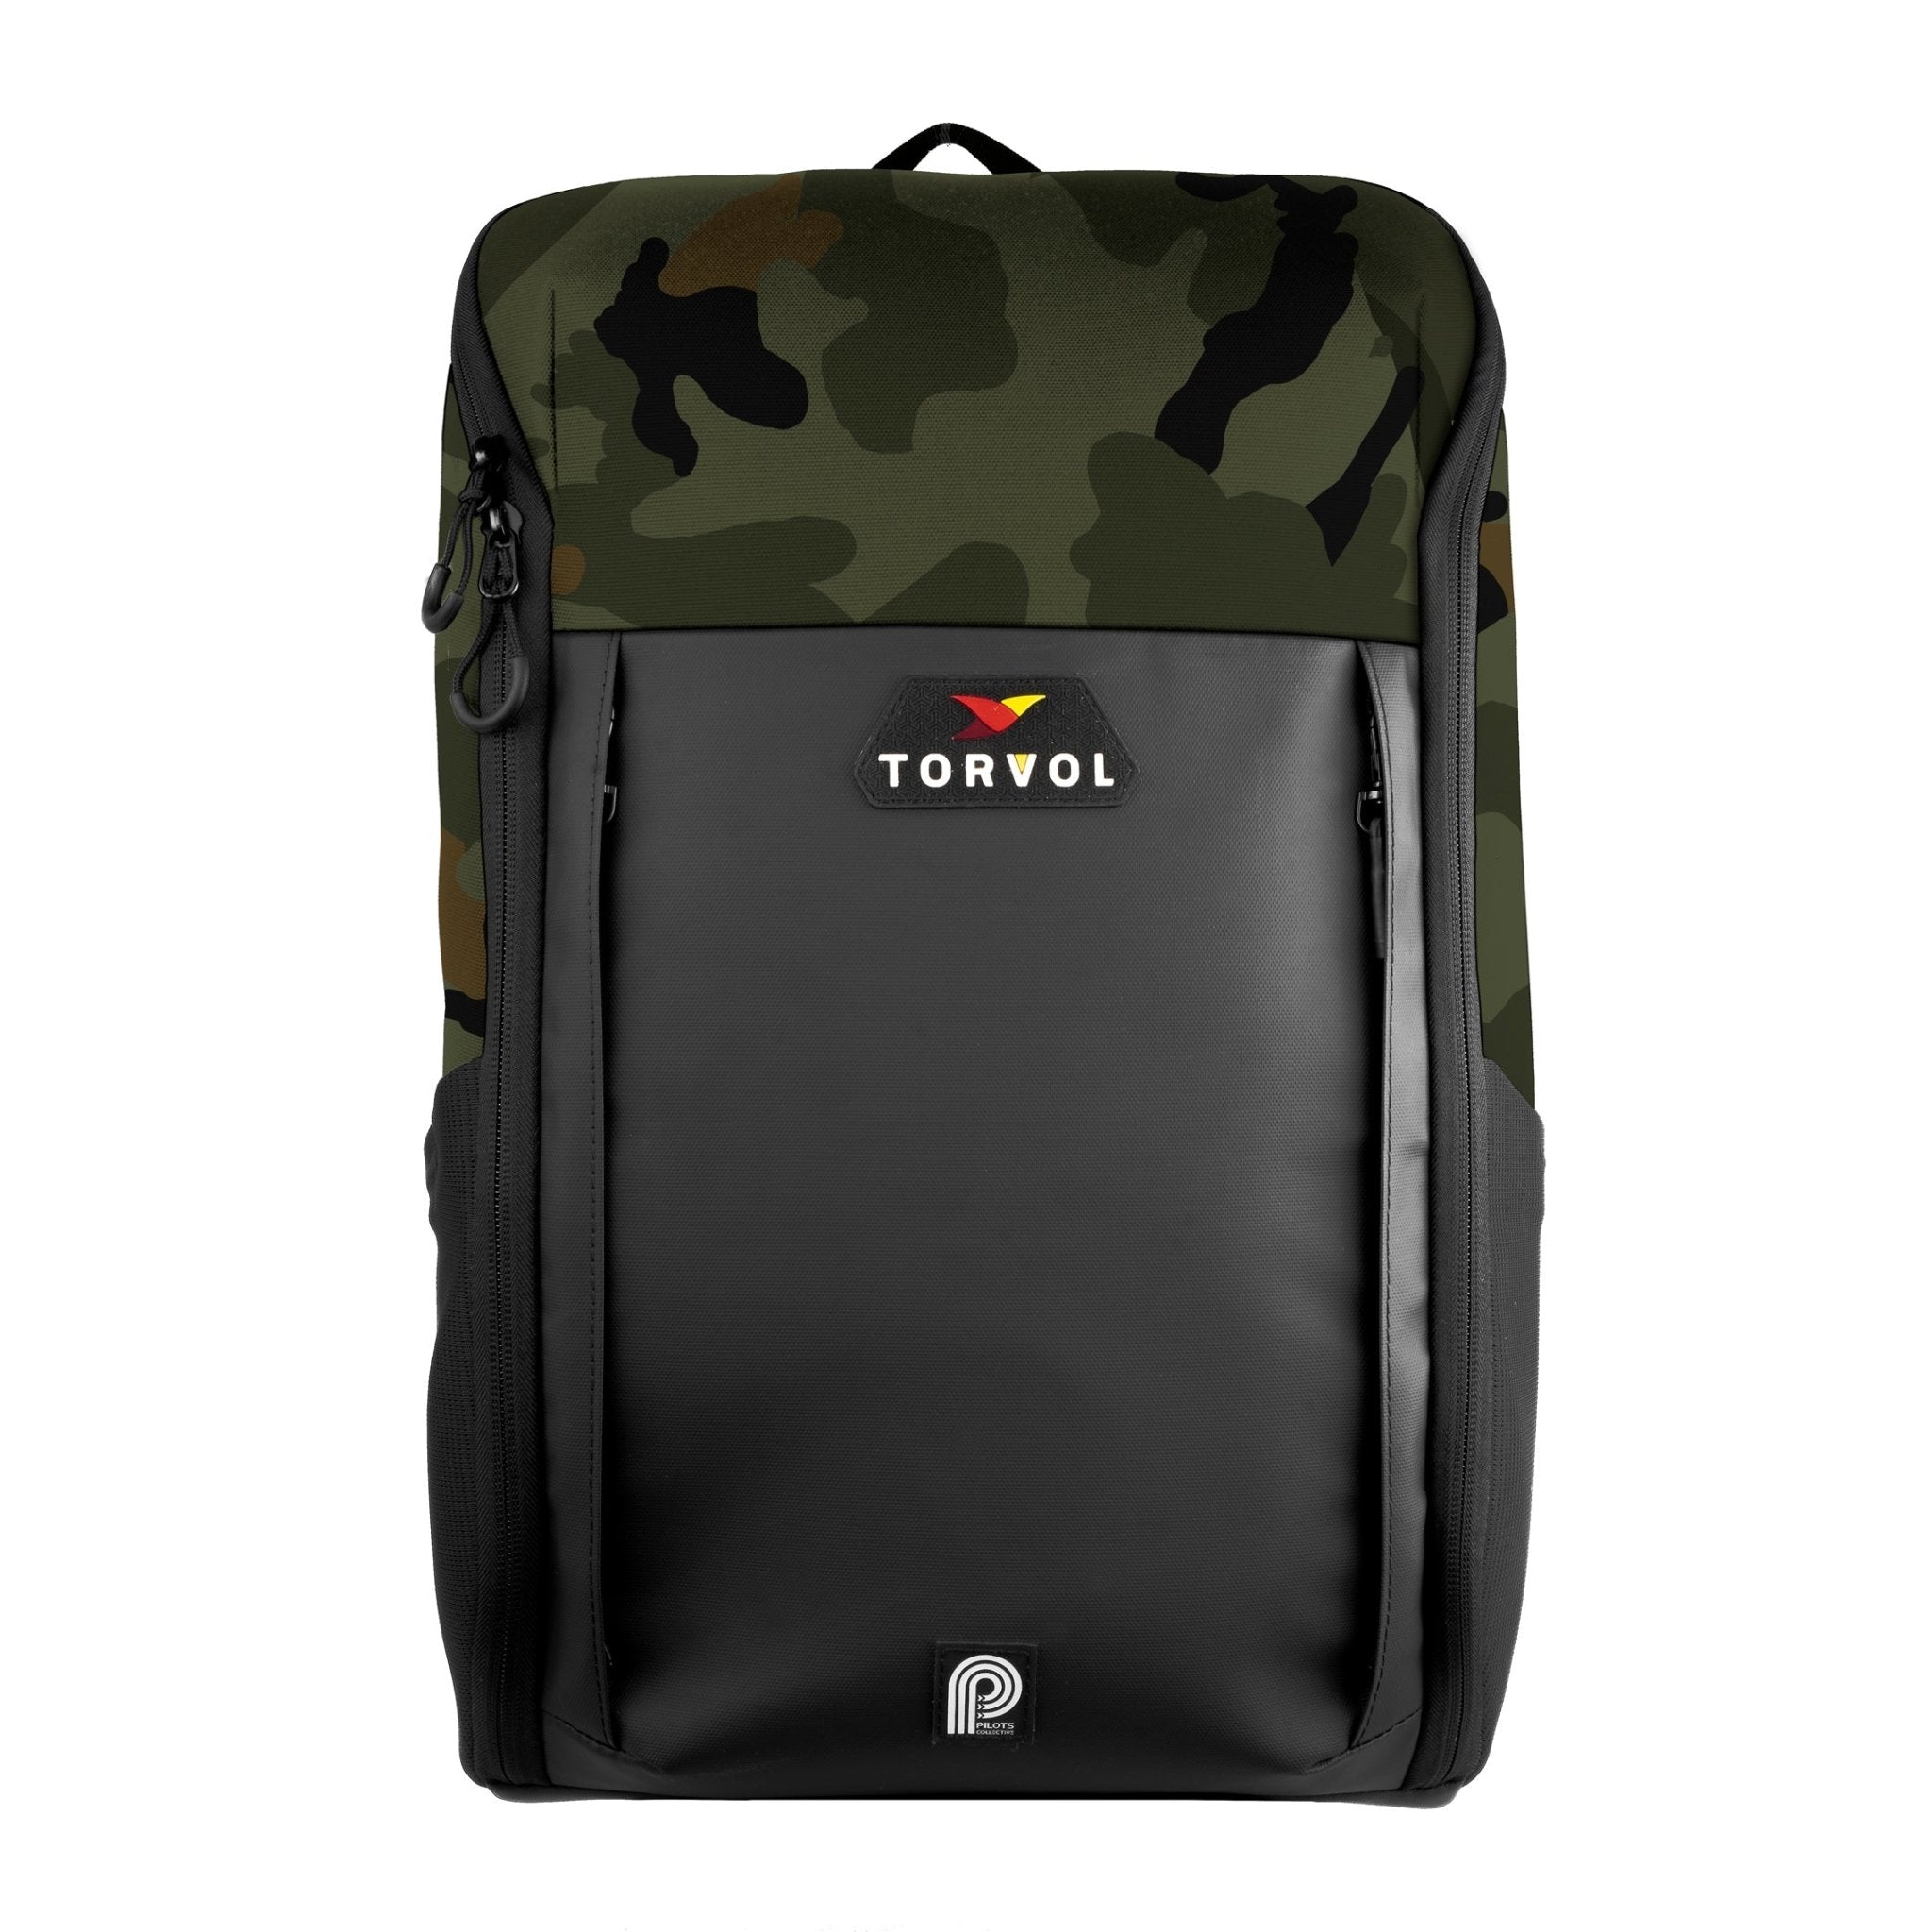 Torvol Urban Backpack - The Ultimate Daily Backpack 12 - Torvol - Drone Authority